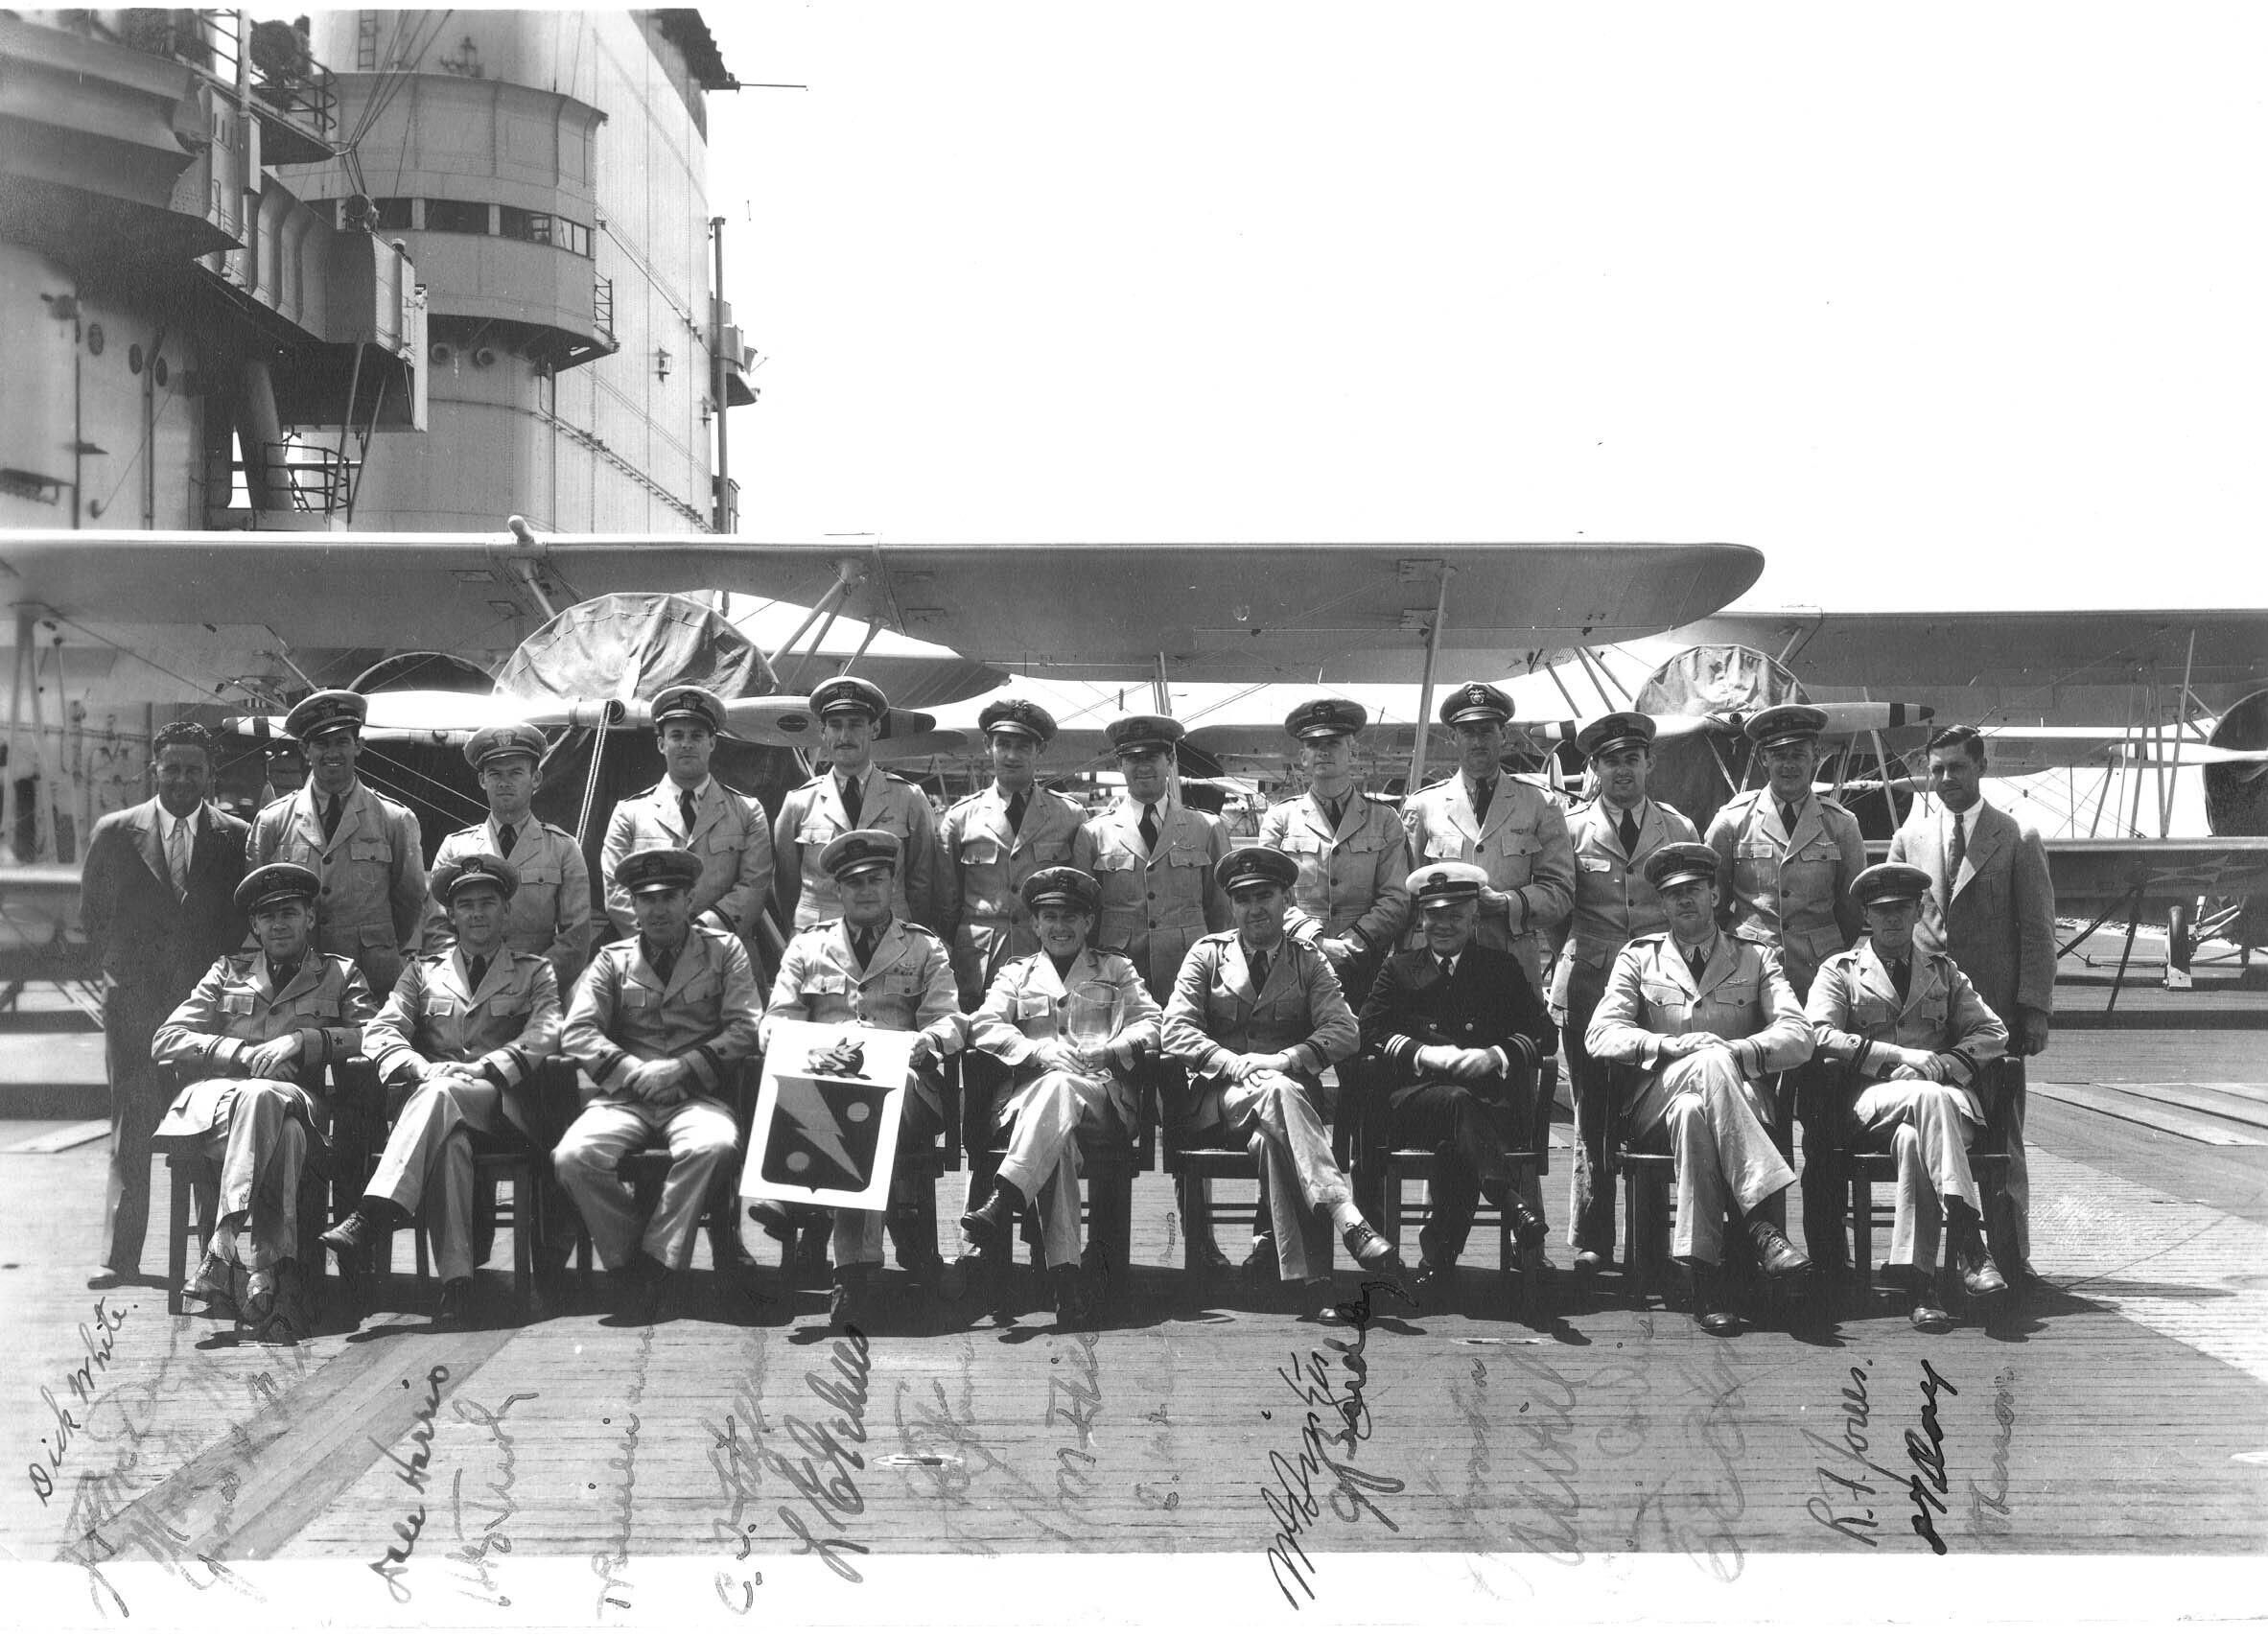 Primary Image of Fighting Squadron Five on the Flightdeck of an Unidentified Aircraft Carrier